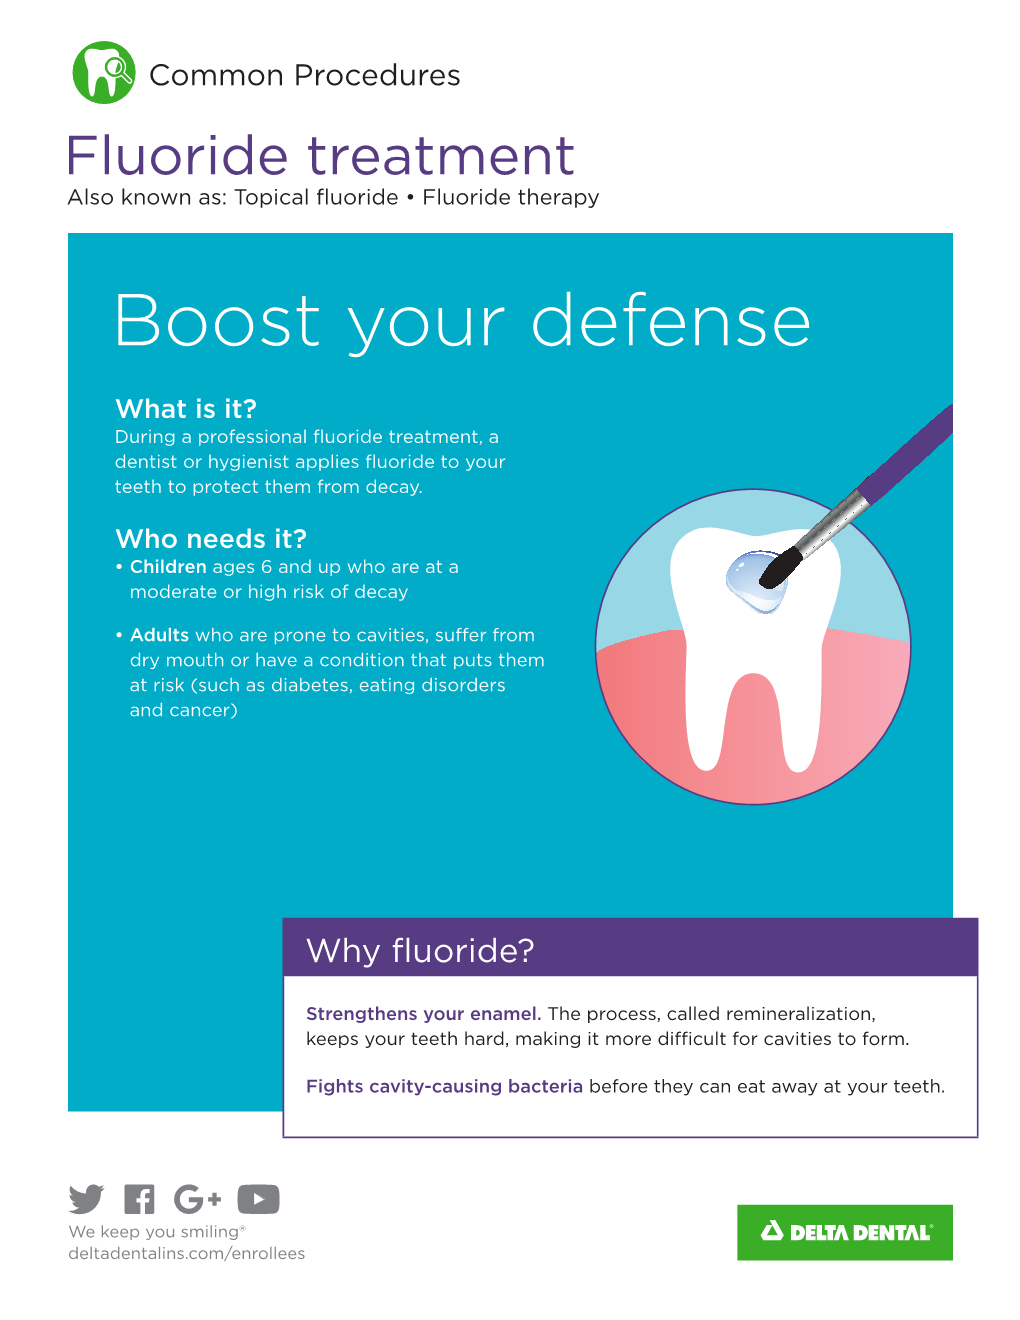 Fluoride Treatment Also Known As: Topical Fluoride • Fluoride Therapy